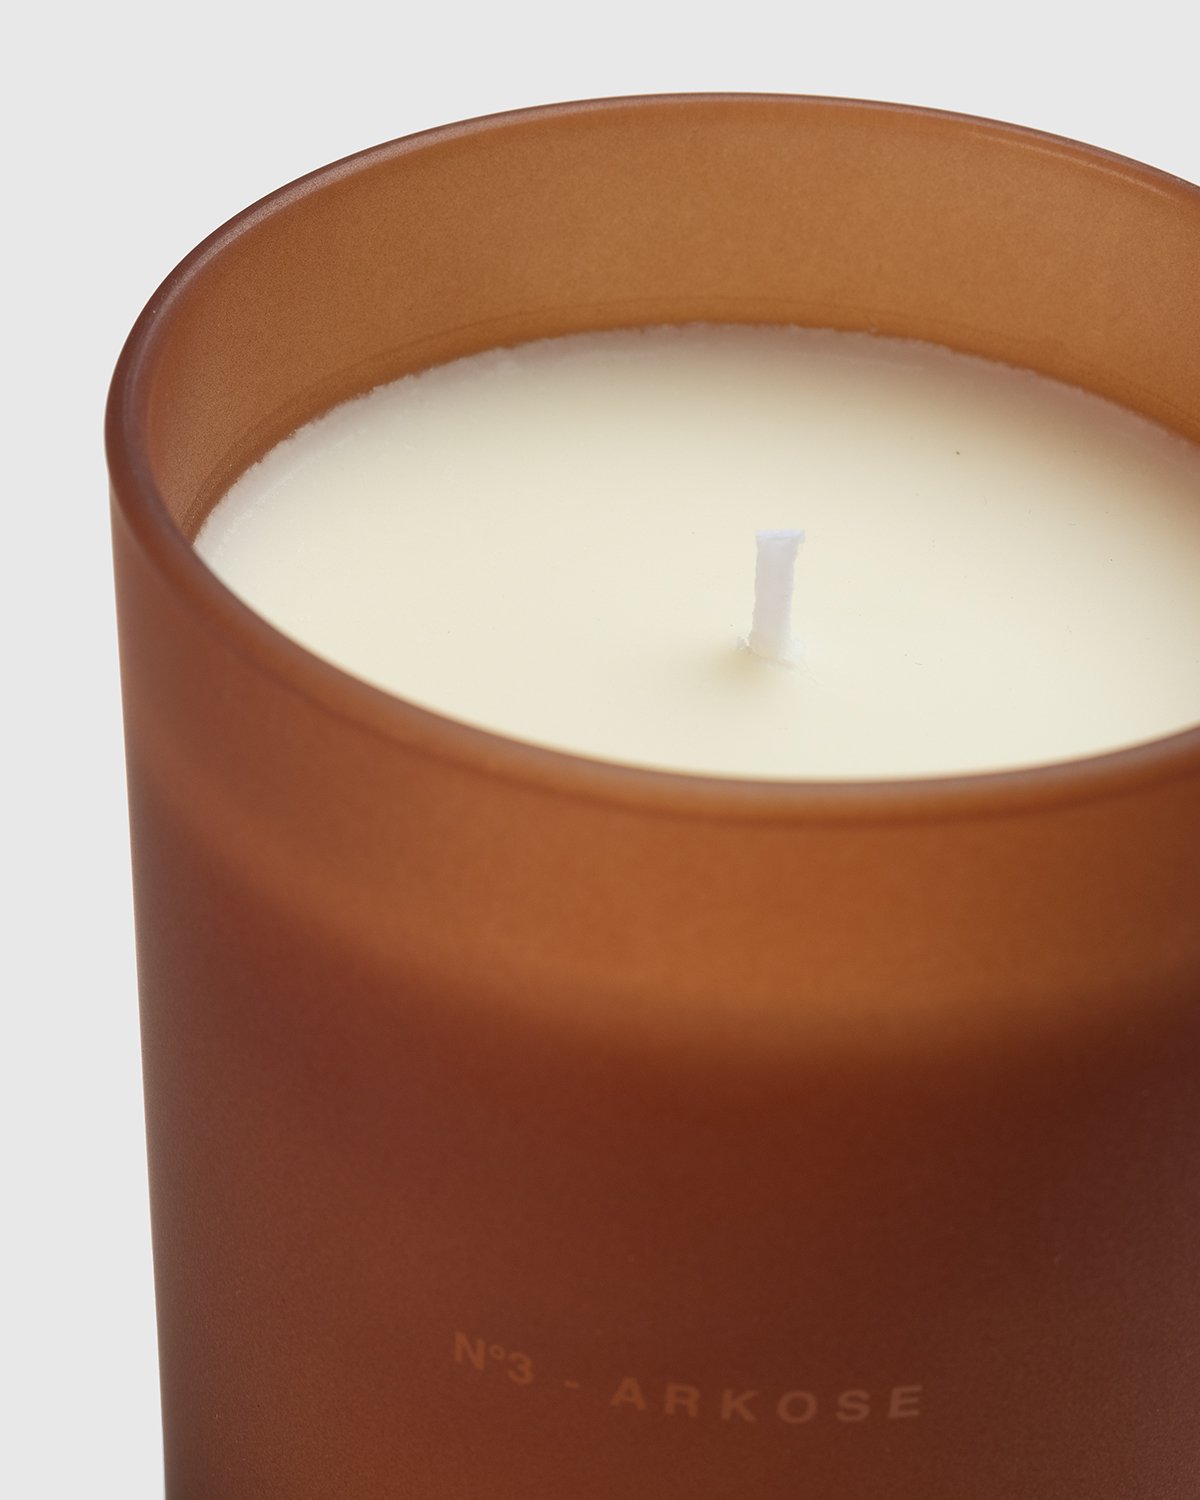 A-Cold-Wall* - No. 3 Arkrose Candle - Lifestyle - Orange - Image 2